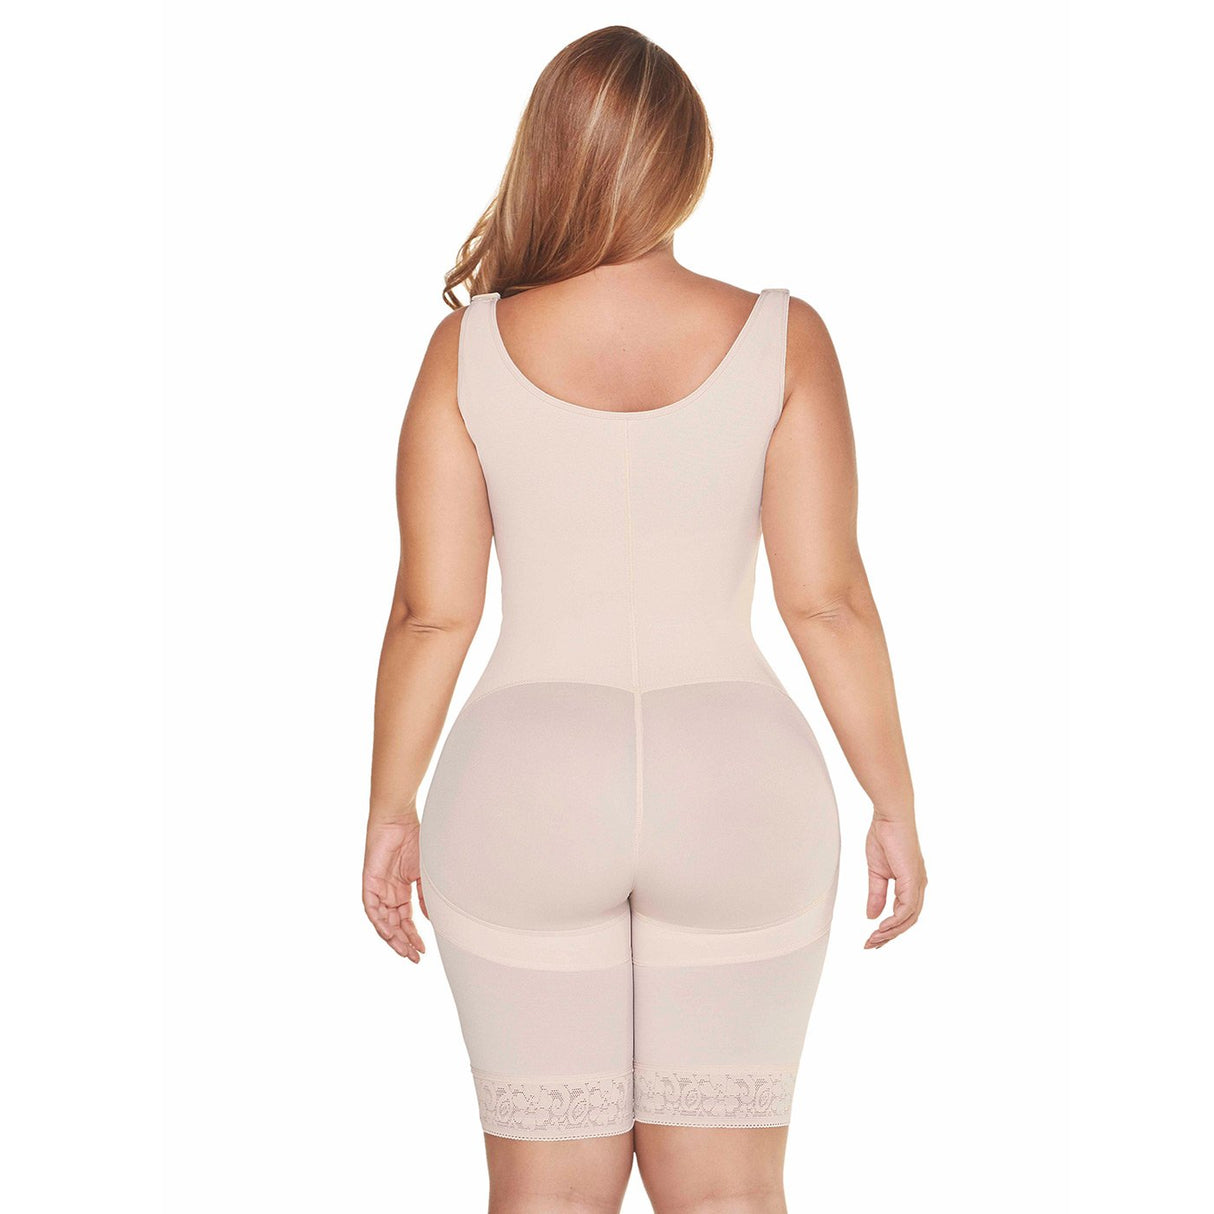 Post Lipoesculpture colombian Hourglass Girdle